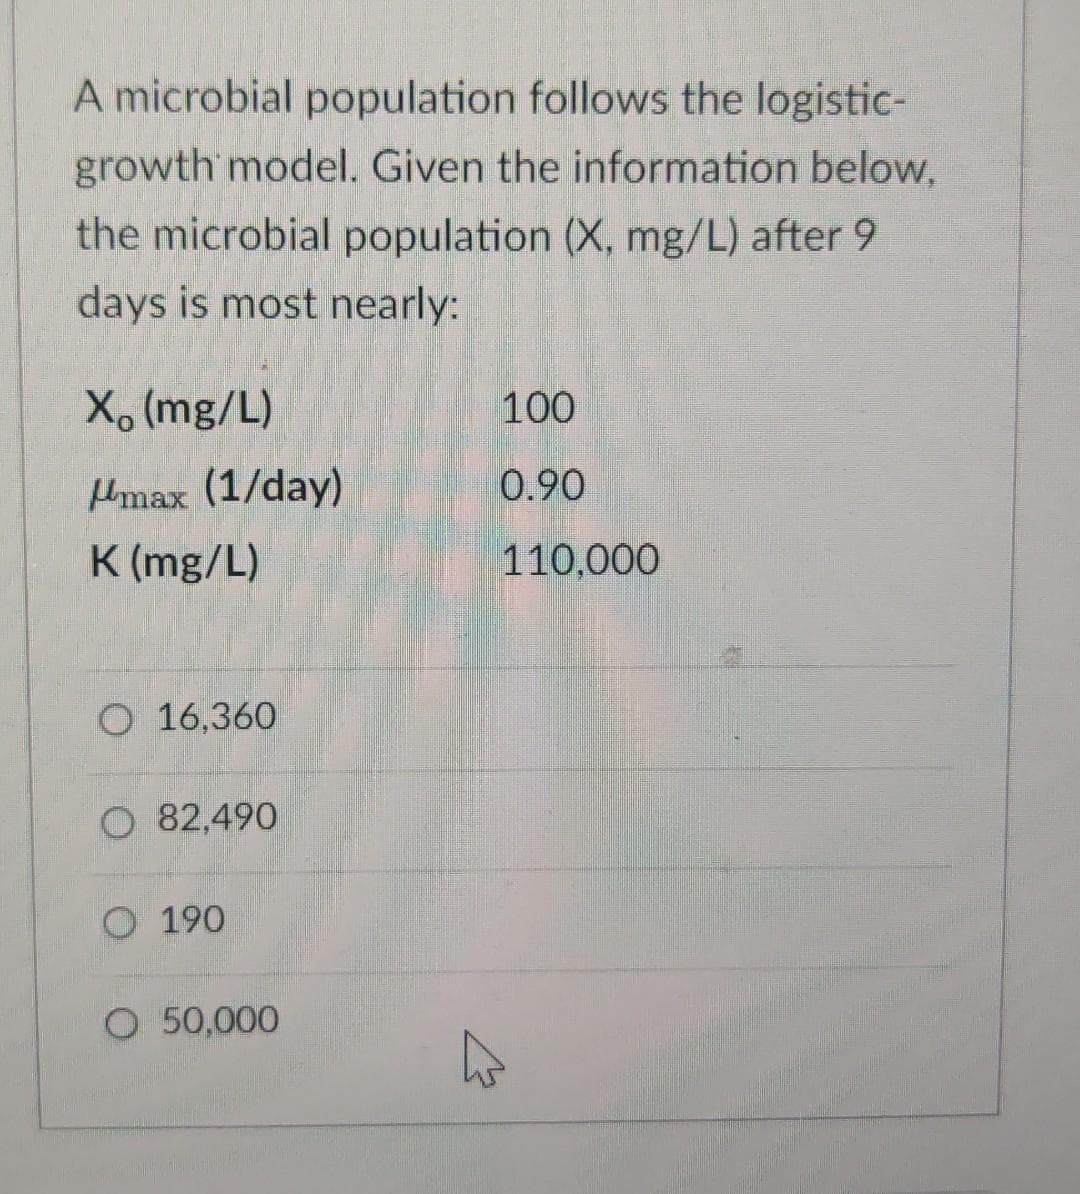 A microbial population follows the logistic-
growth model. Given the information below,
the microbial population (X, mg/L) after 9
days is most nearly:
X (mg/L)
100
Hmax (1/day)
0.90
K (mg/L)
110,000
O 16,360
O 82,490
190
O 50,000
